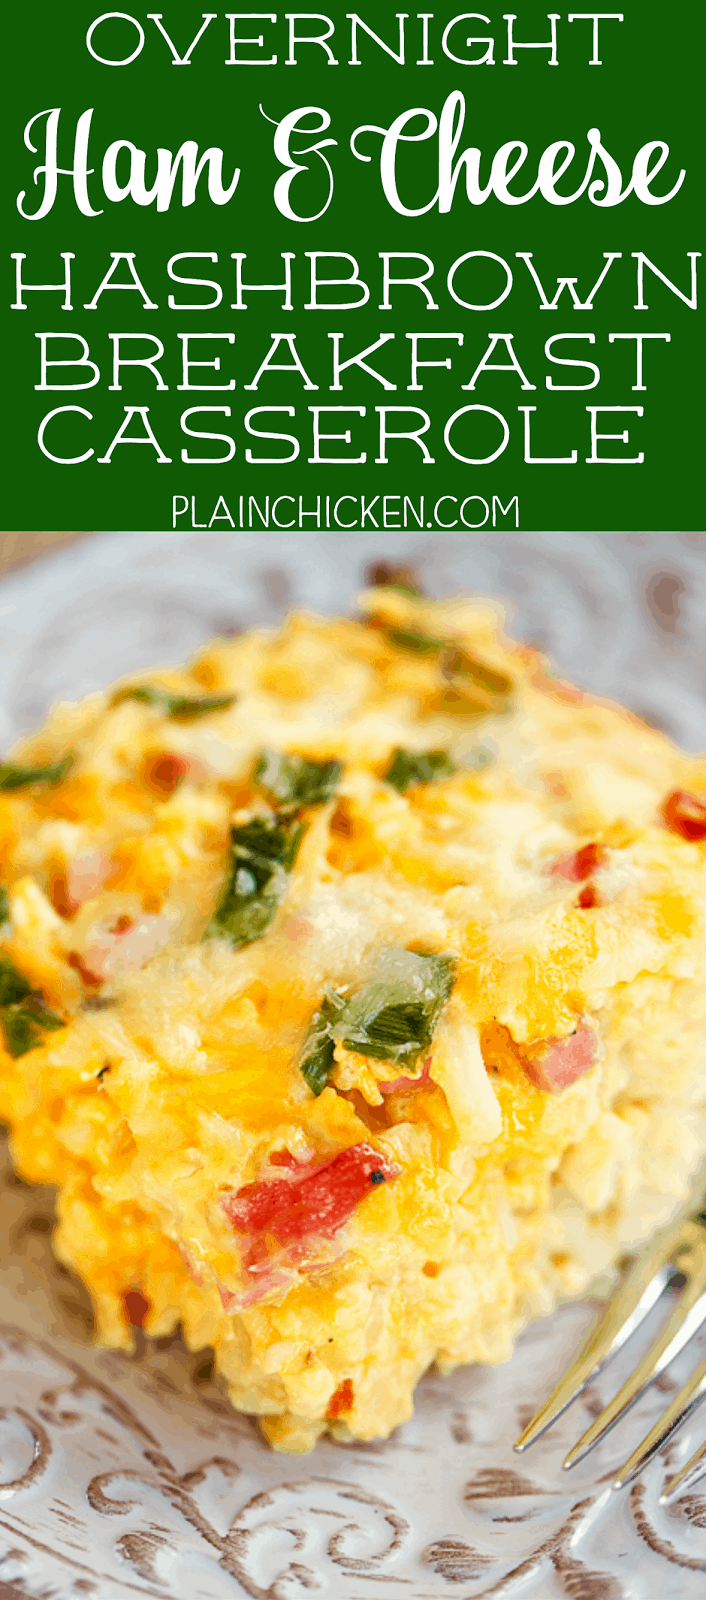 Overnight Ham and Cheese Hashbrown Breakfast Casserole - hash browns, cheese, ham, green onions, eggs, evaporated milk - mix together and refrigerate overnight for a quick breakfast. Great for overnight guest and the upcoming holidays!